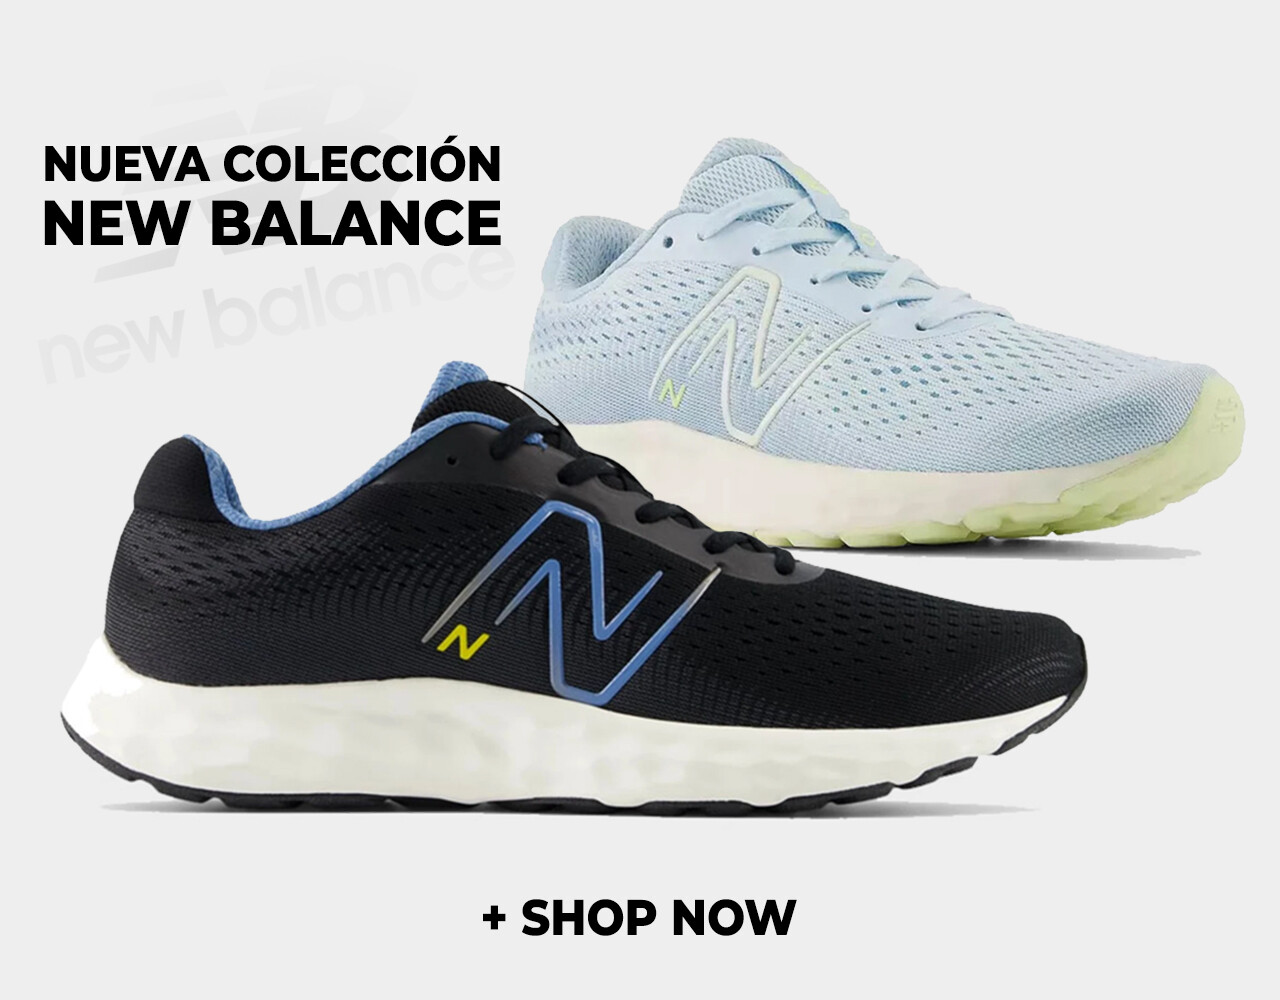 NEW BALANCE NEW COLLECTION